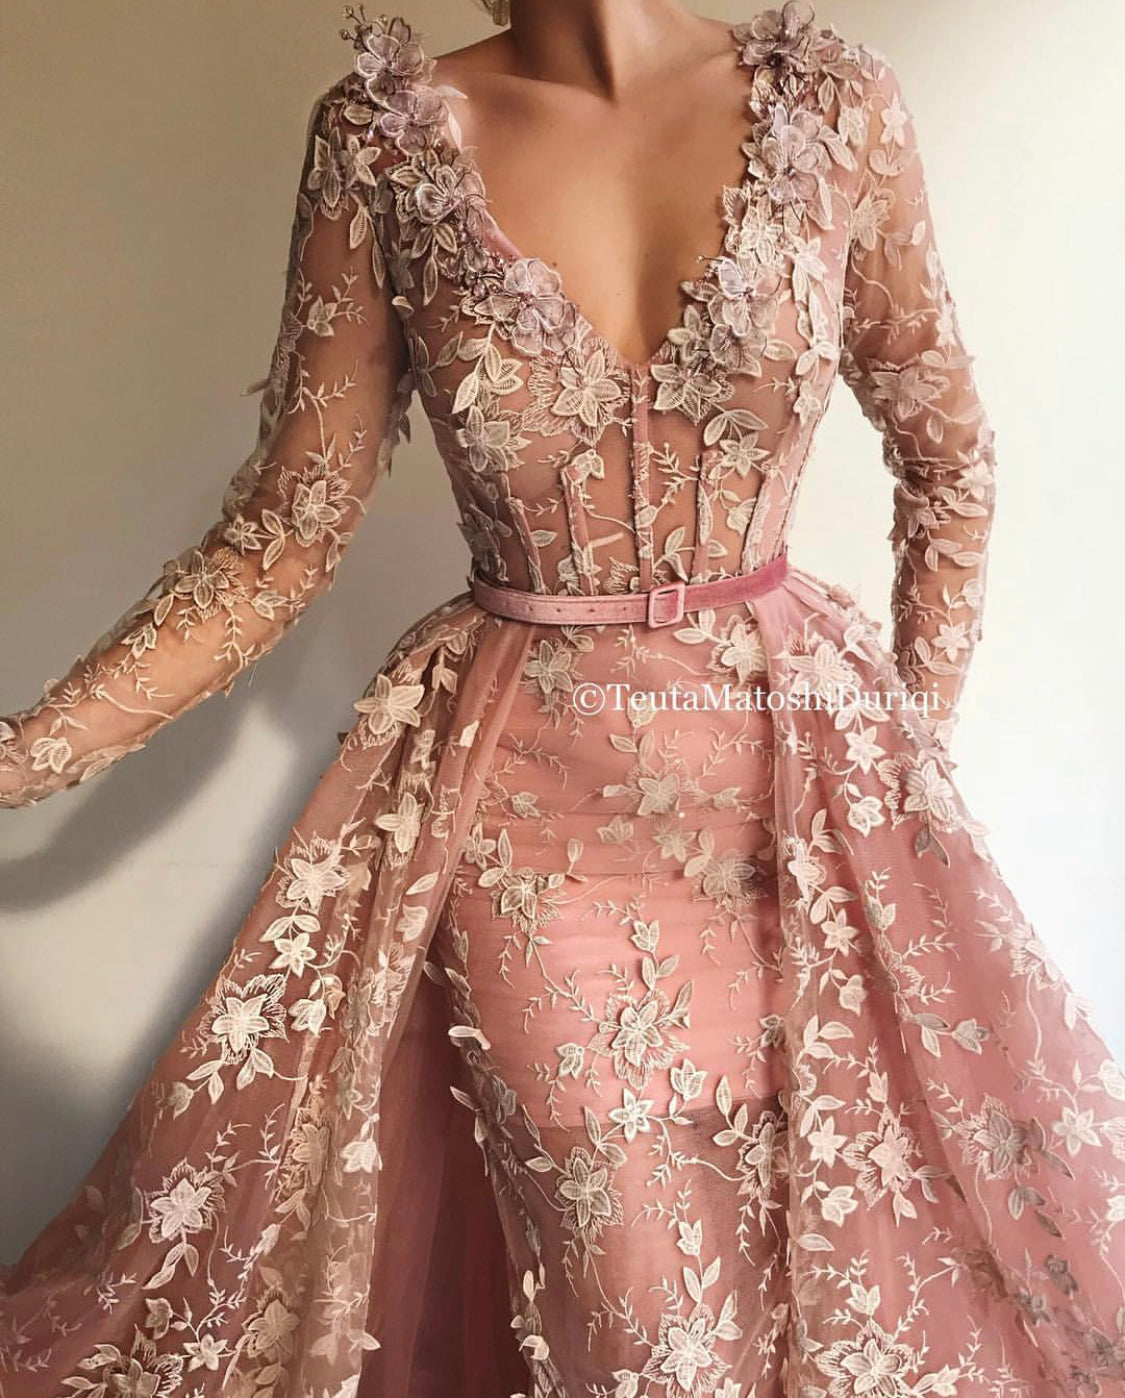 Pink overskirt dress with belt, lace, long sleeves, embroidery and v-neck